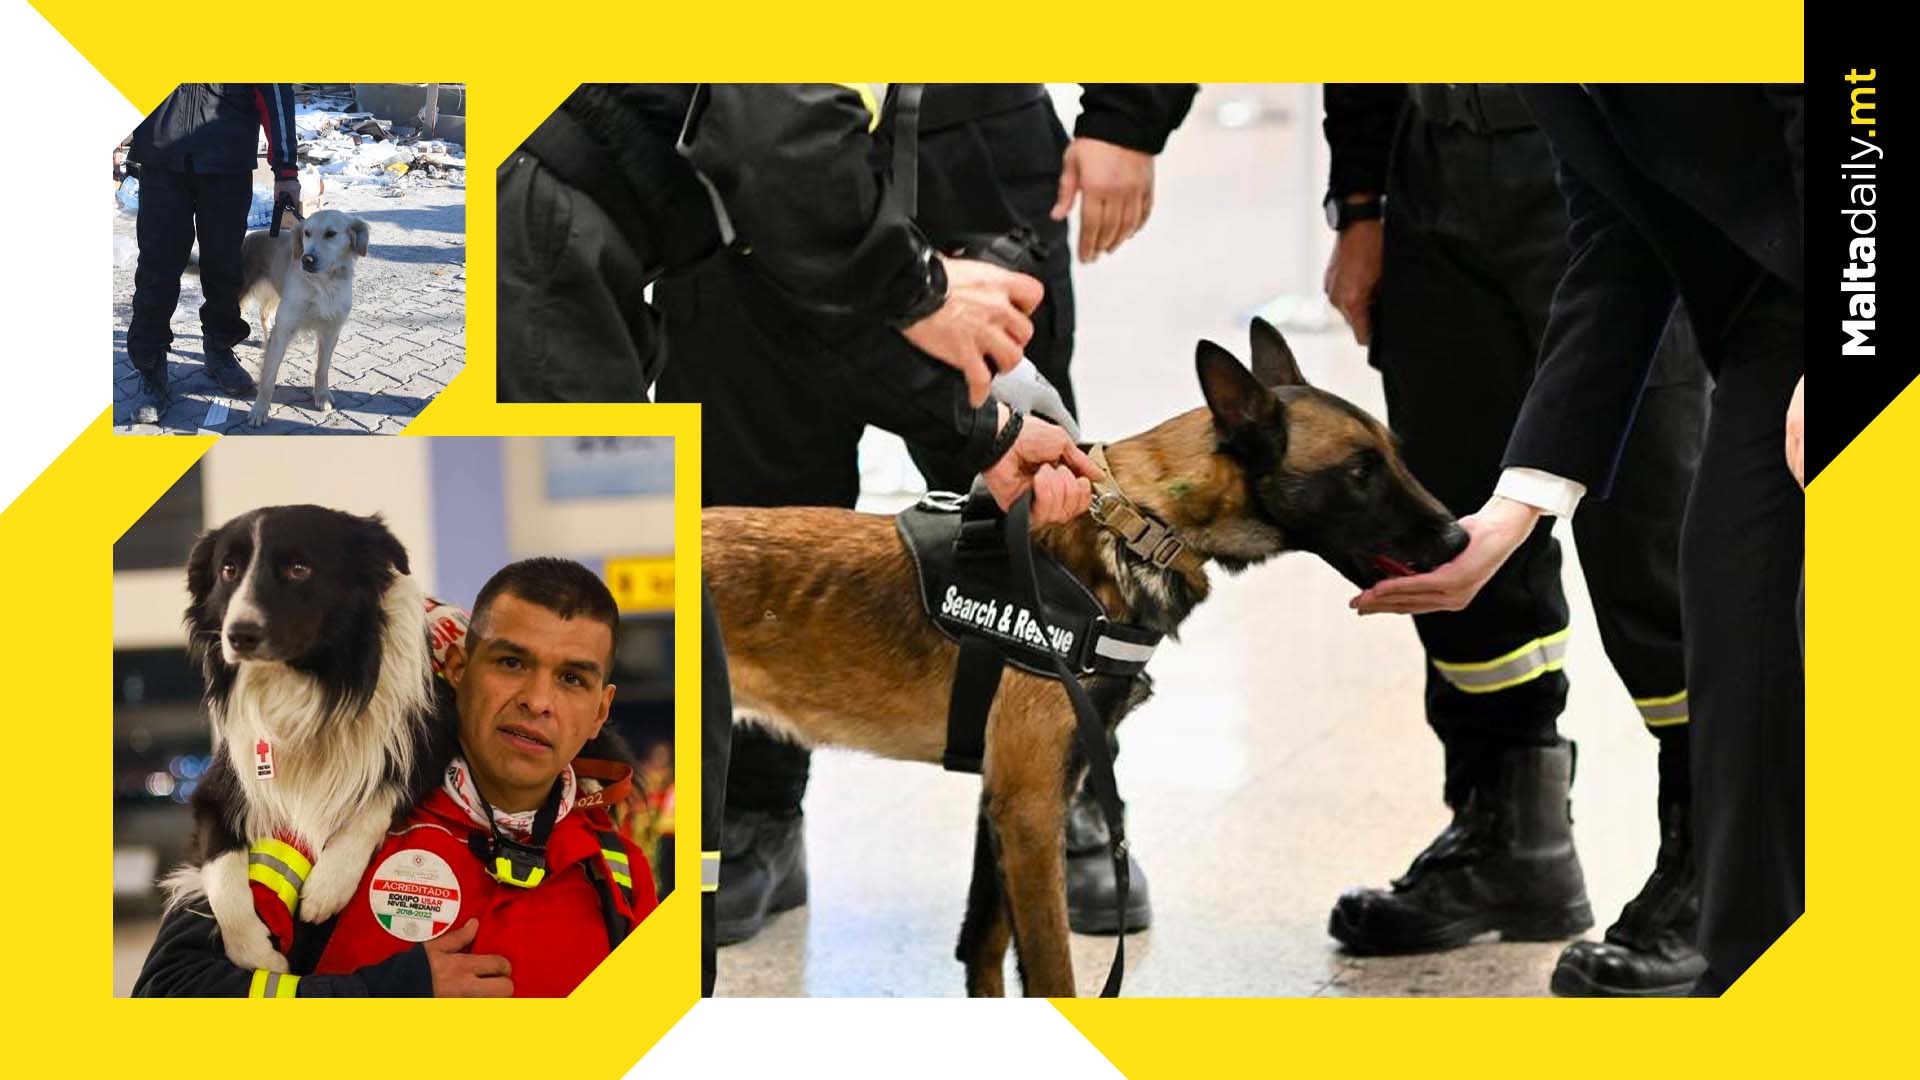 Honouring the rescue dogs finding survivors in Turkey and Syria